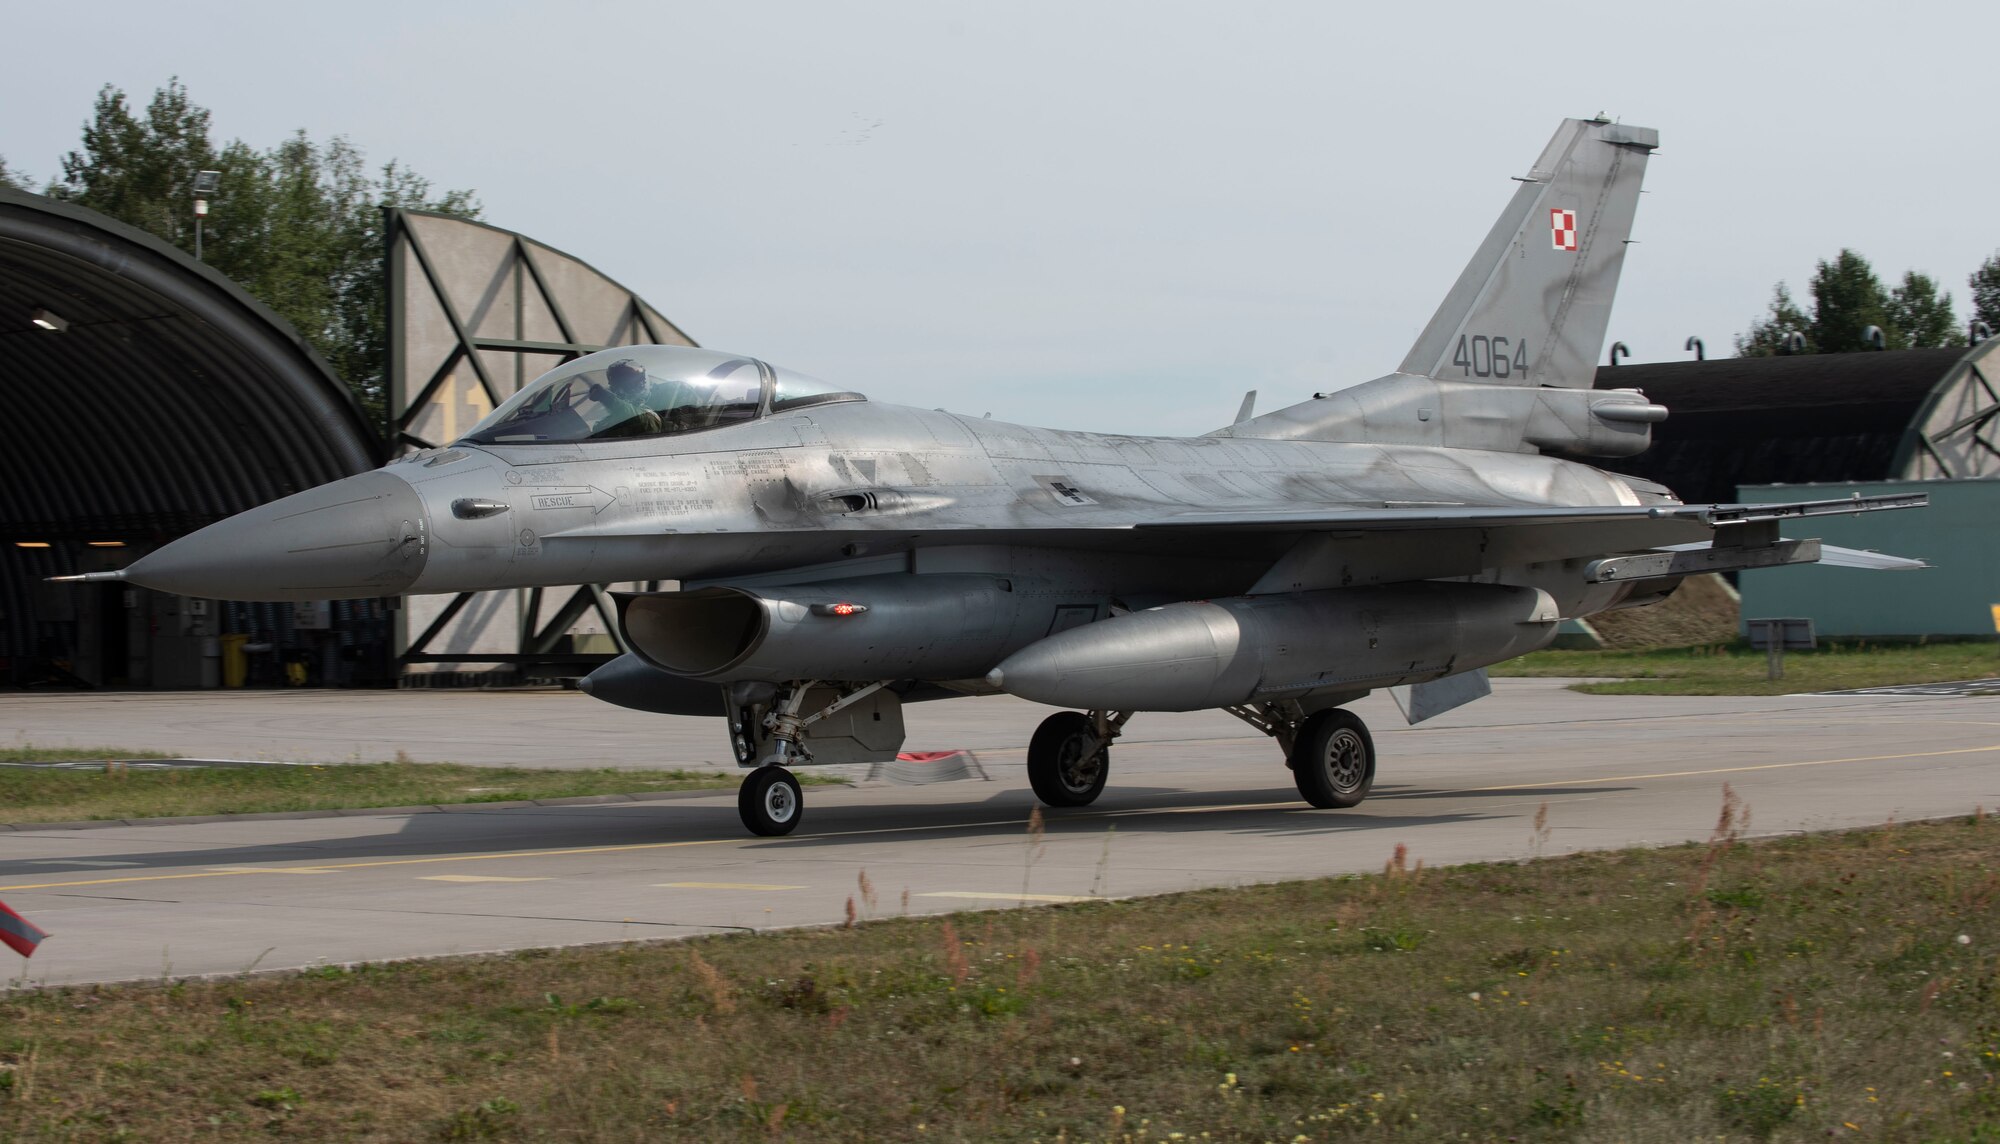 A Polish air force F-16, assigned to the 32nd Tactical Air Base, taxis out of a hangar at Łask AB, Poland, August 19, 2020. The U.S. and Polish forces integrated to participate in Aviation Detachment Rotation 20.4, with goals to progress partnerships, strengthen capabilities and learn from each other. (U.S. Air Force photo by Senior Airman Melody W. Howley)